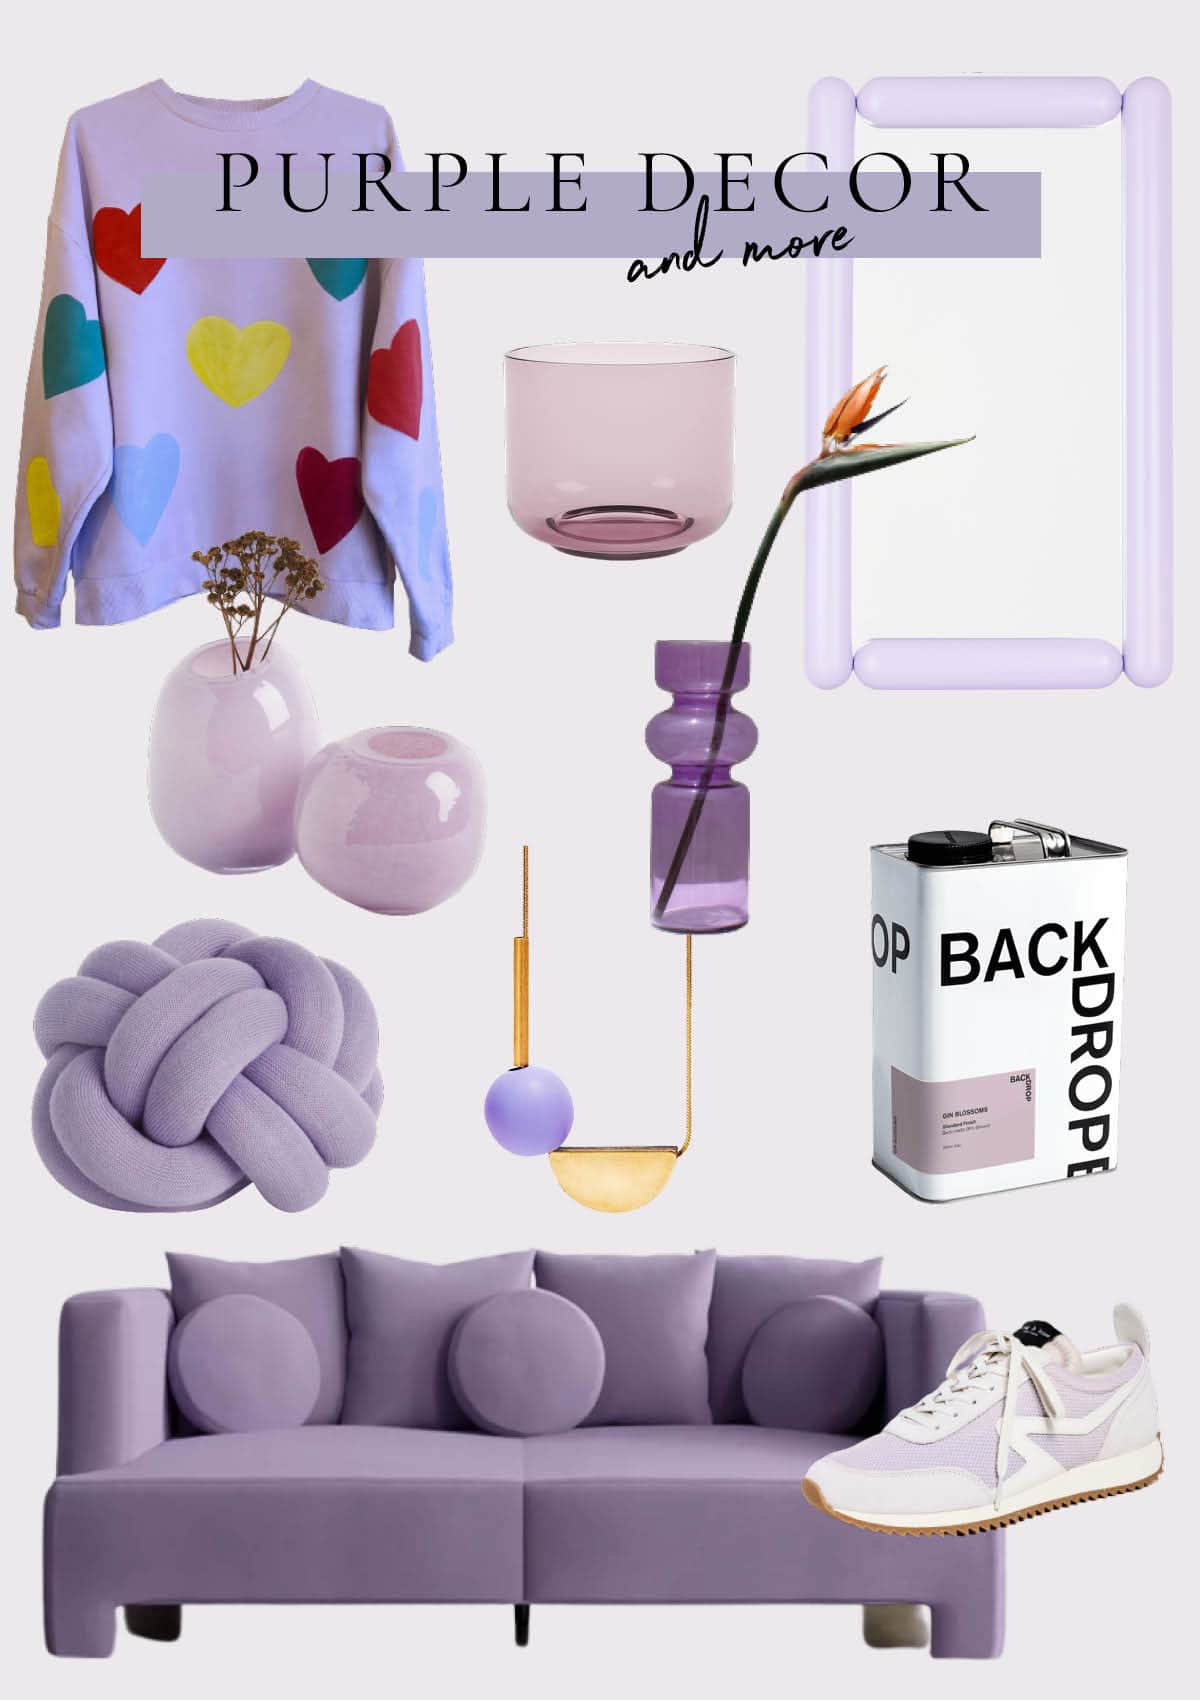 Modern purple decor and fashion including a lilac couch